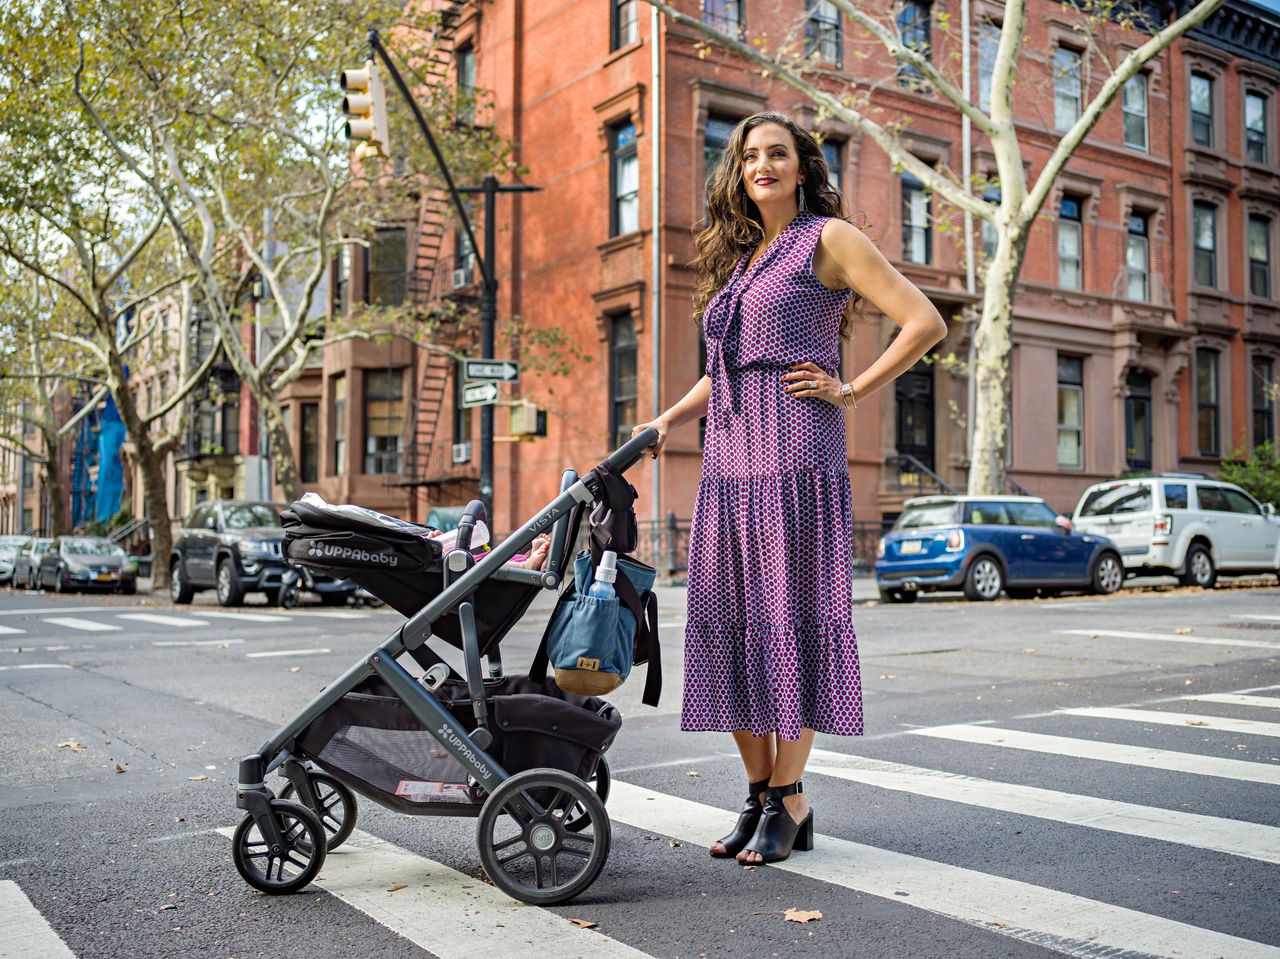 Rent the Runway co-founder Jennifer Hyman and her baby, Aurora, in Brooklyn, New York.